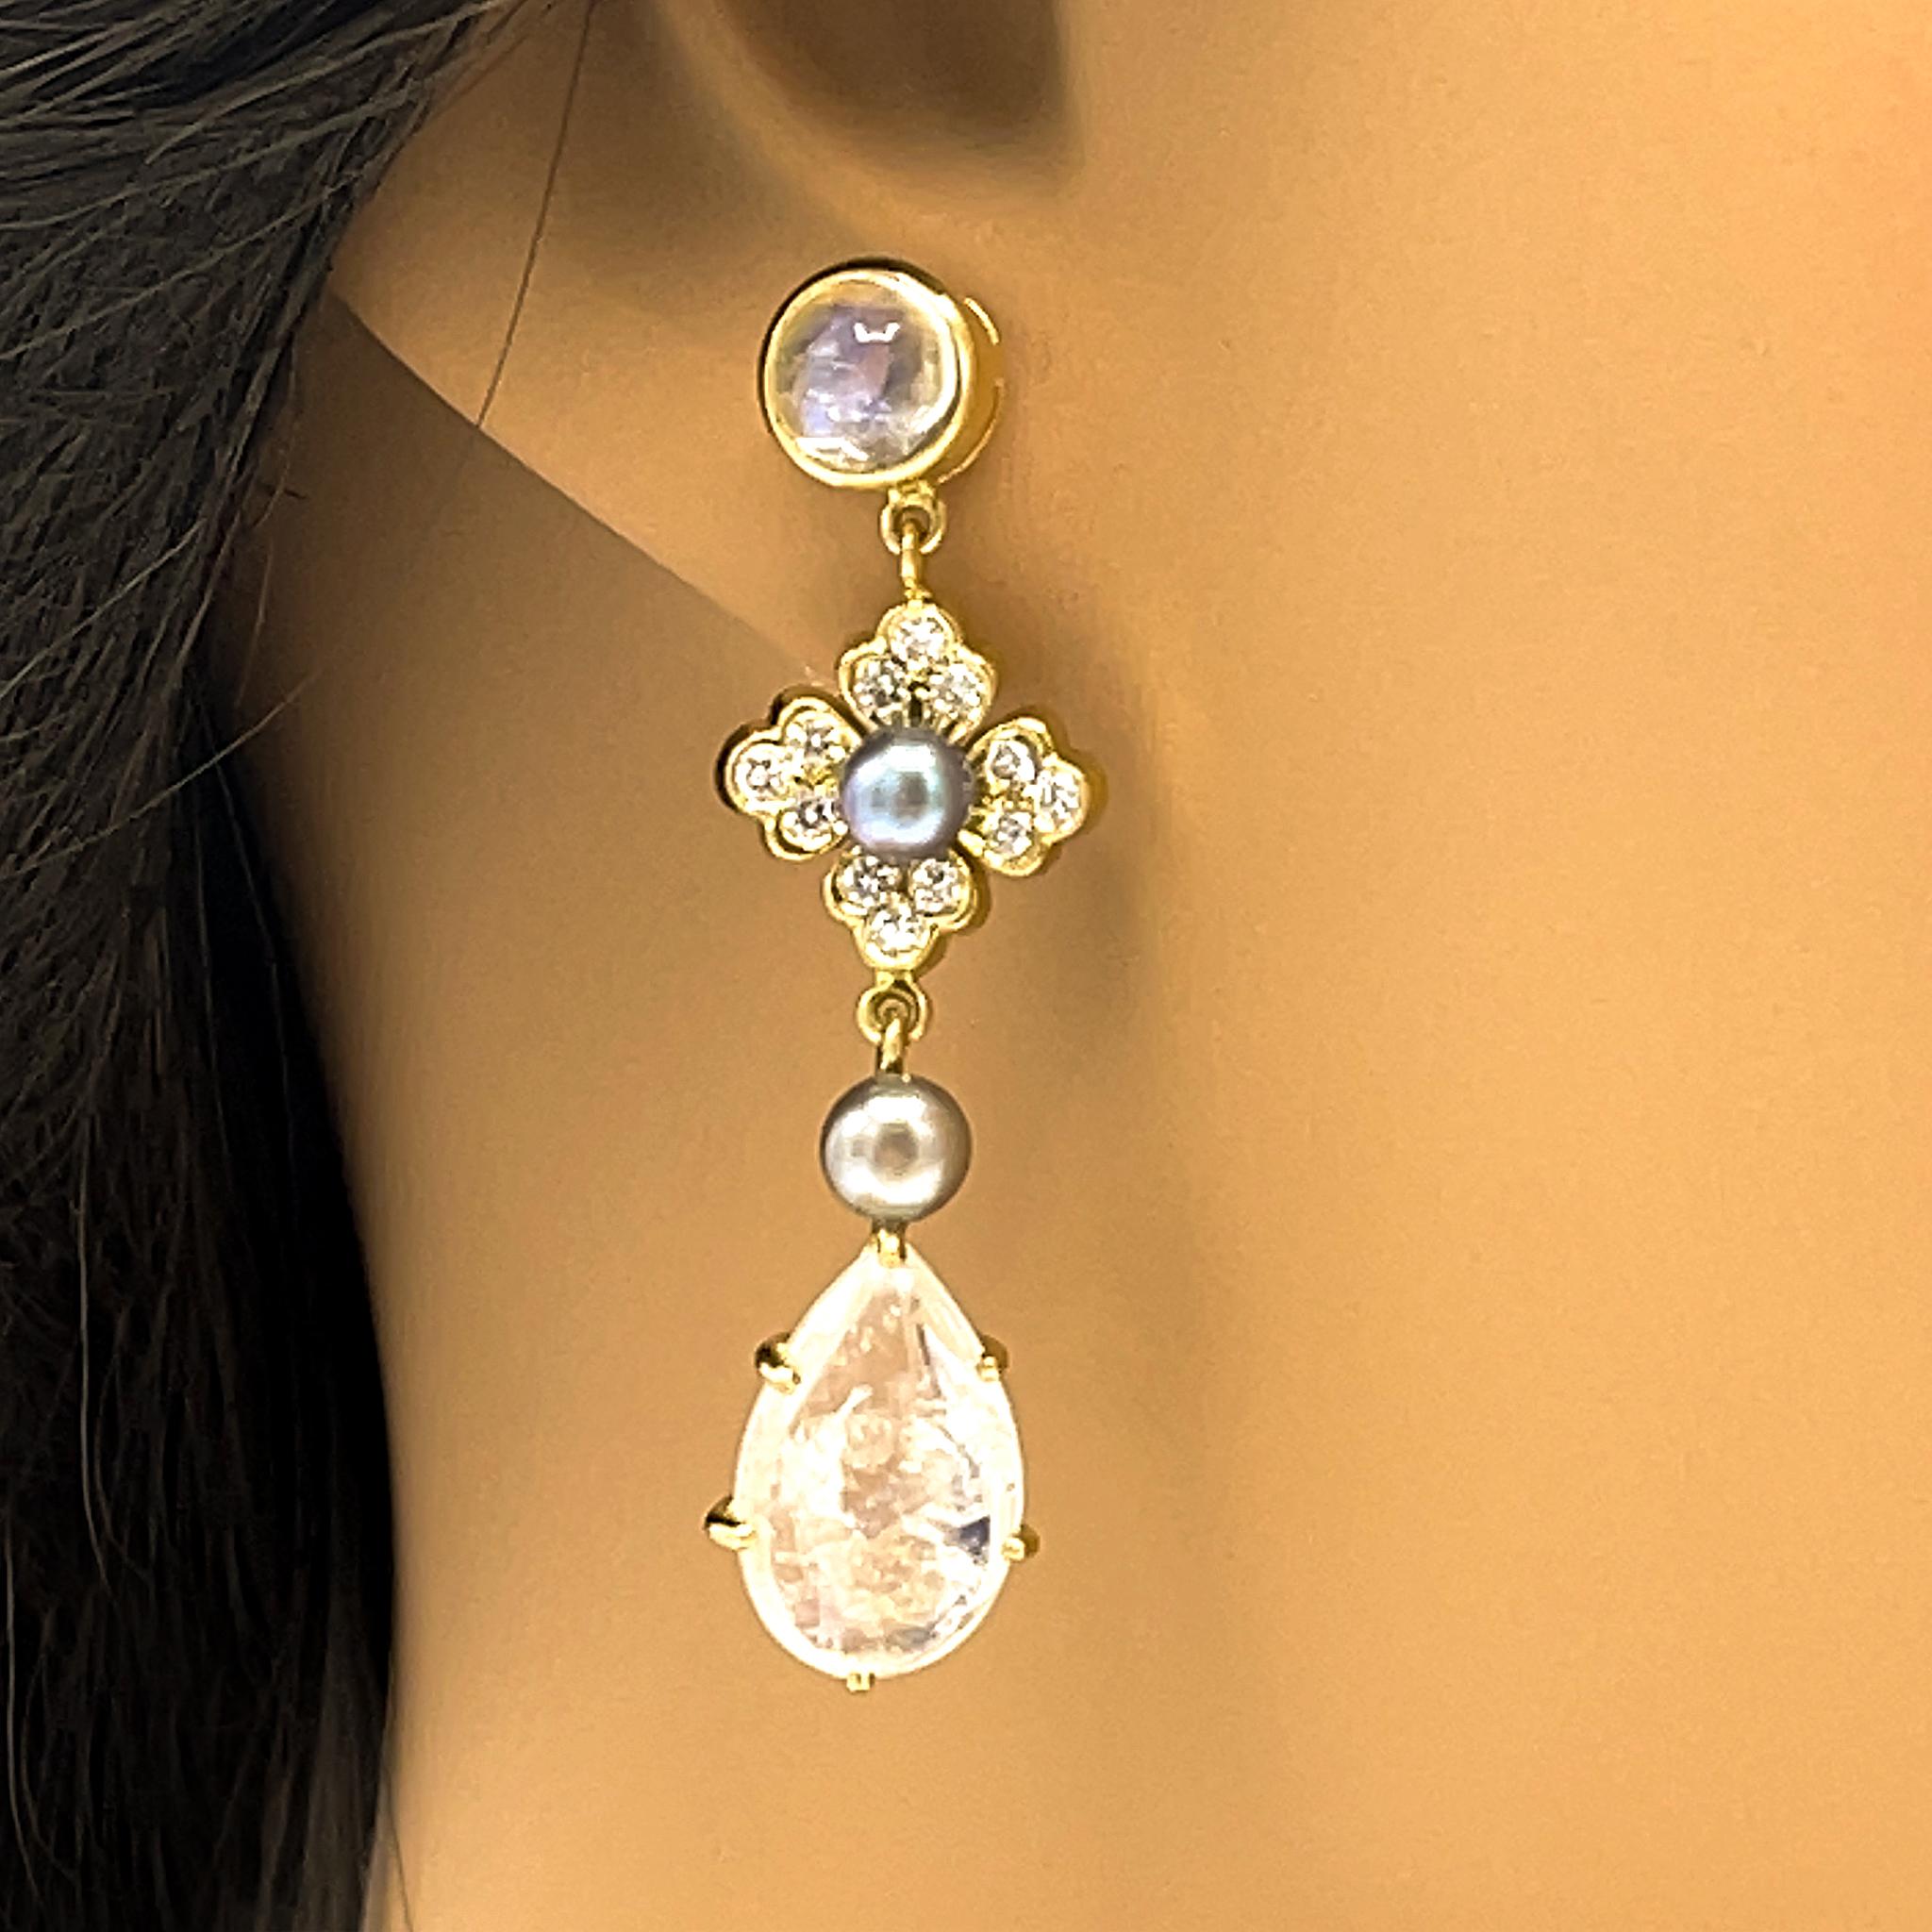 18k Yellow Gold
Moonstones: 10.43 tcw
Diamond: 0.45 ct twd
Total Weight: 9.92 grams
Length: 1.5 inches